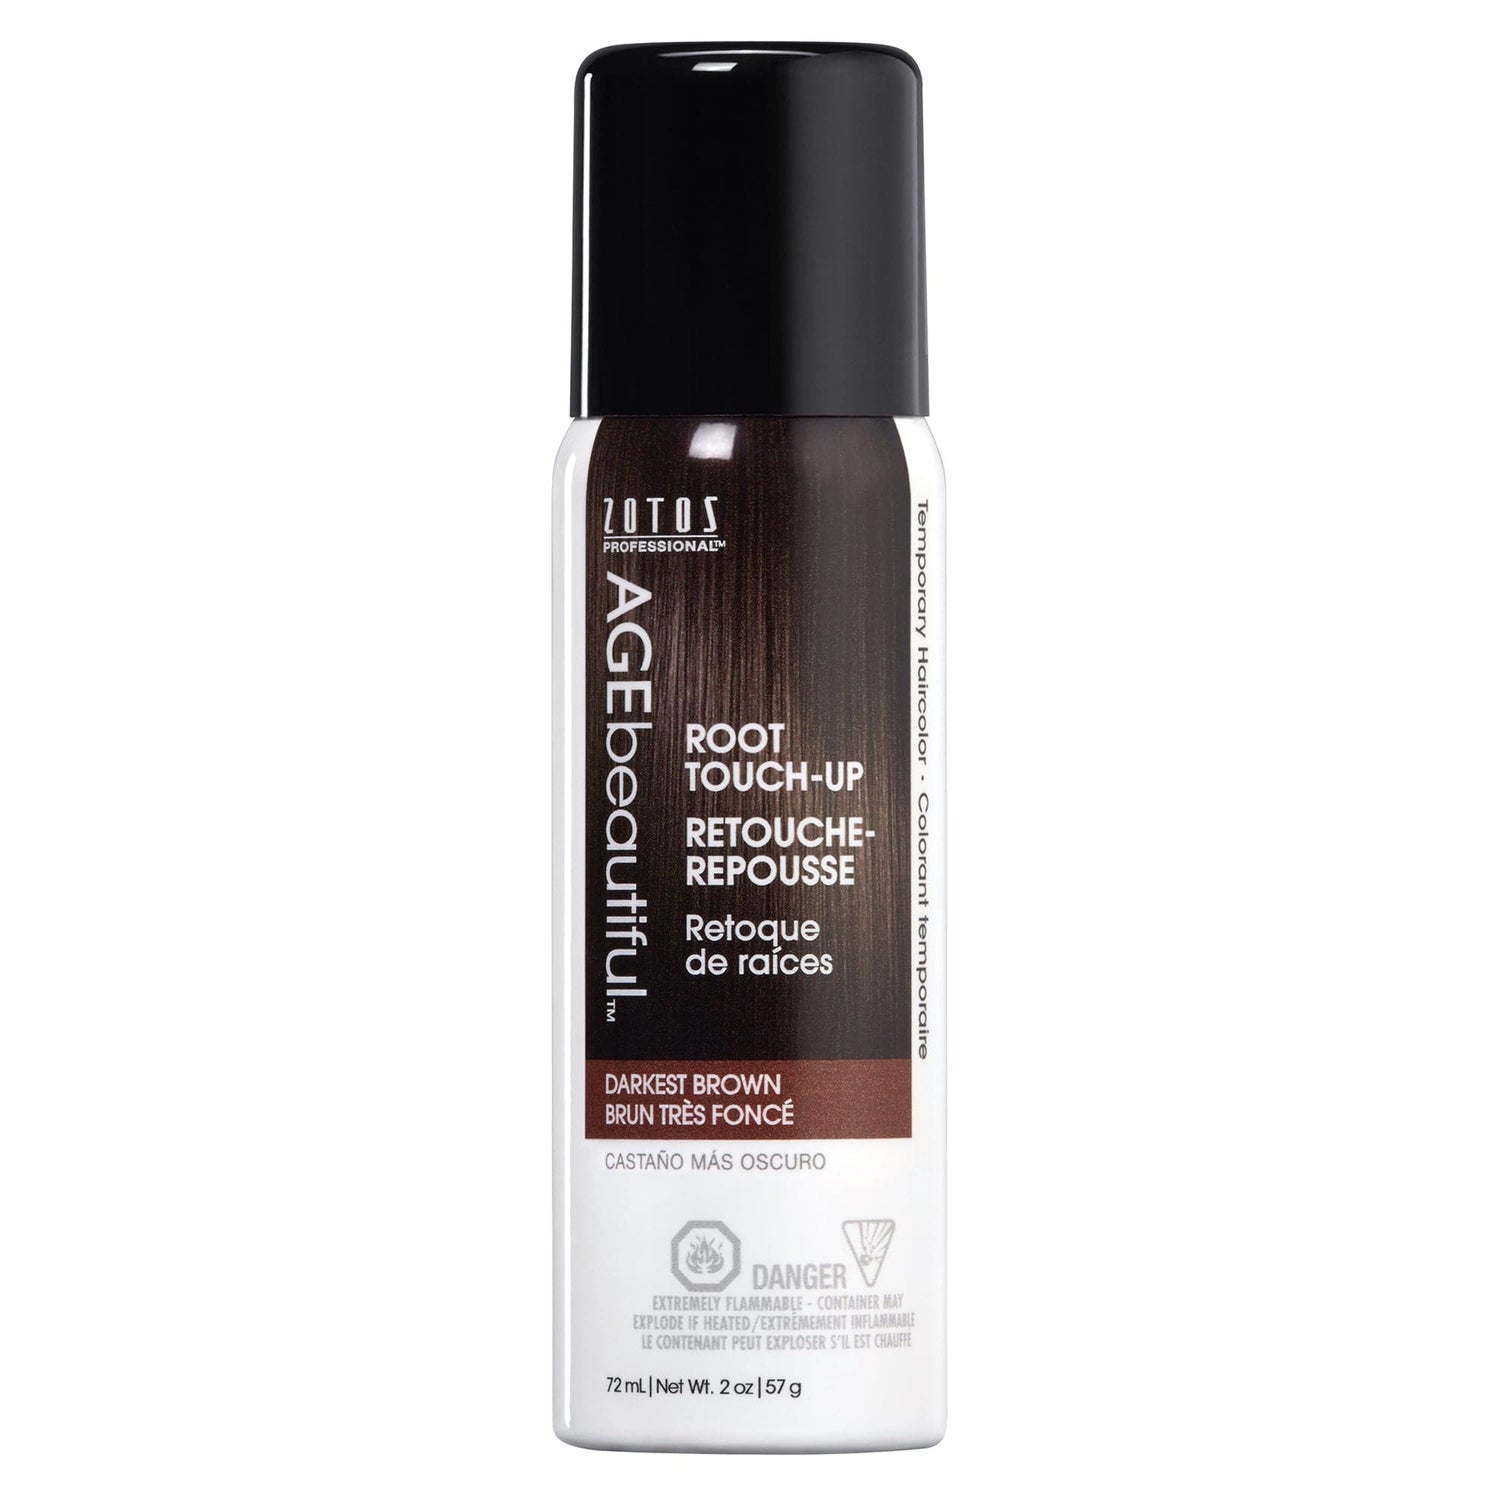 AGEbeautiful® Temporary Root Touch-Up  - Darkest Brown